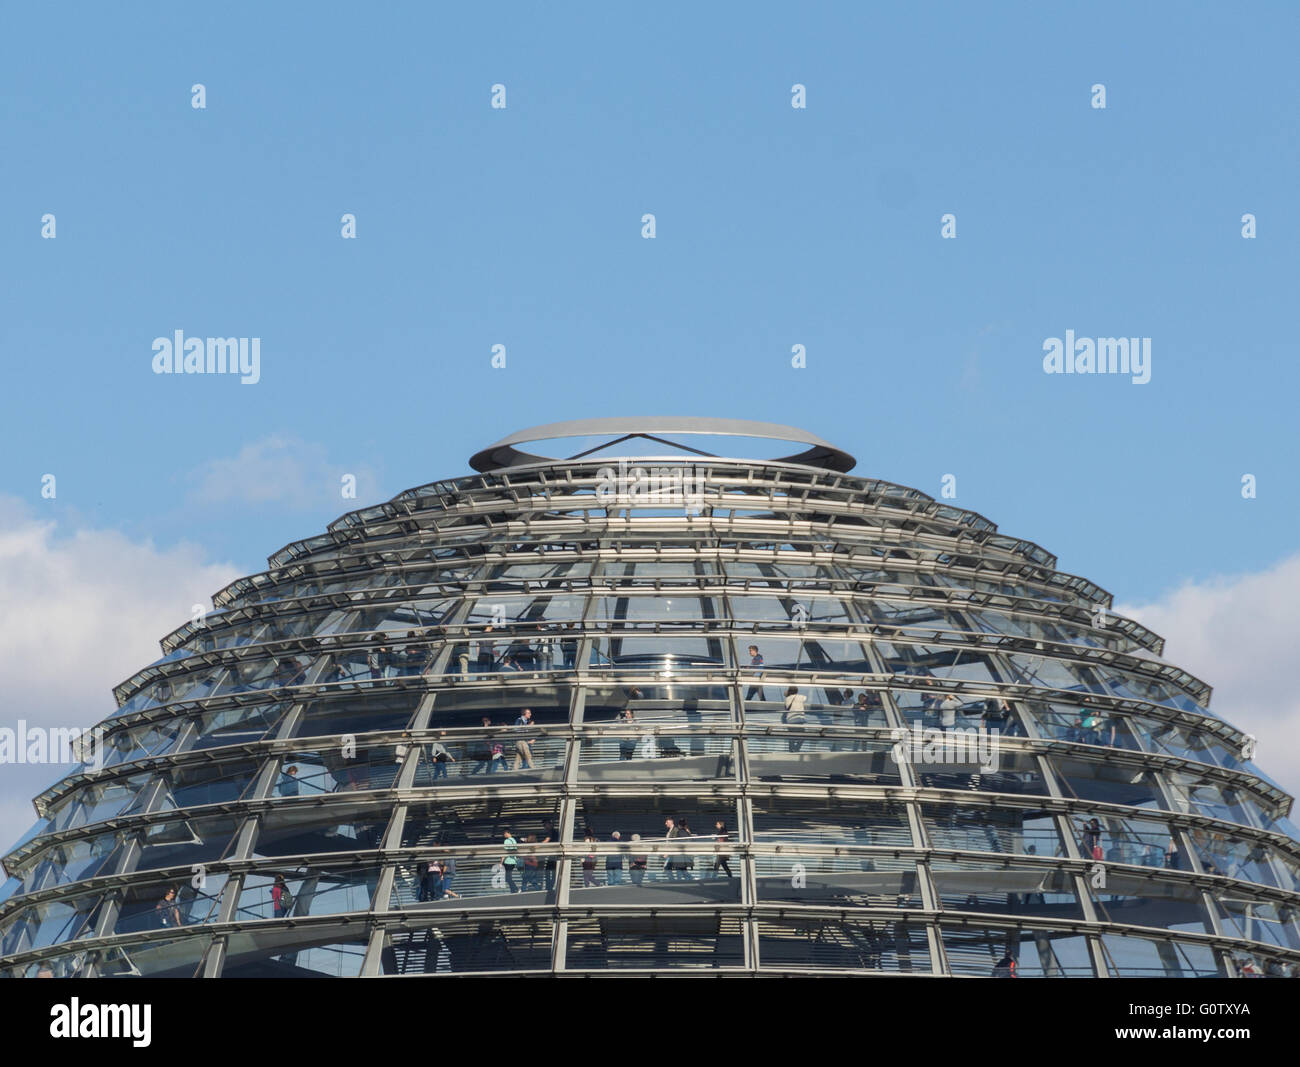 The Reichstag dome, the top of Reichstag building in Berlin, Germany. Stock Photo